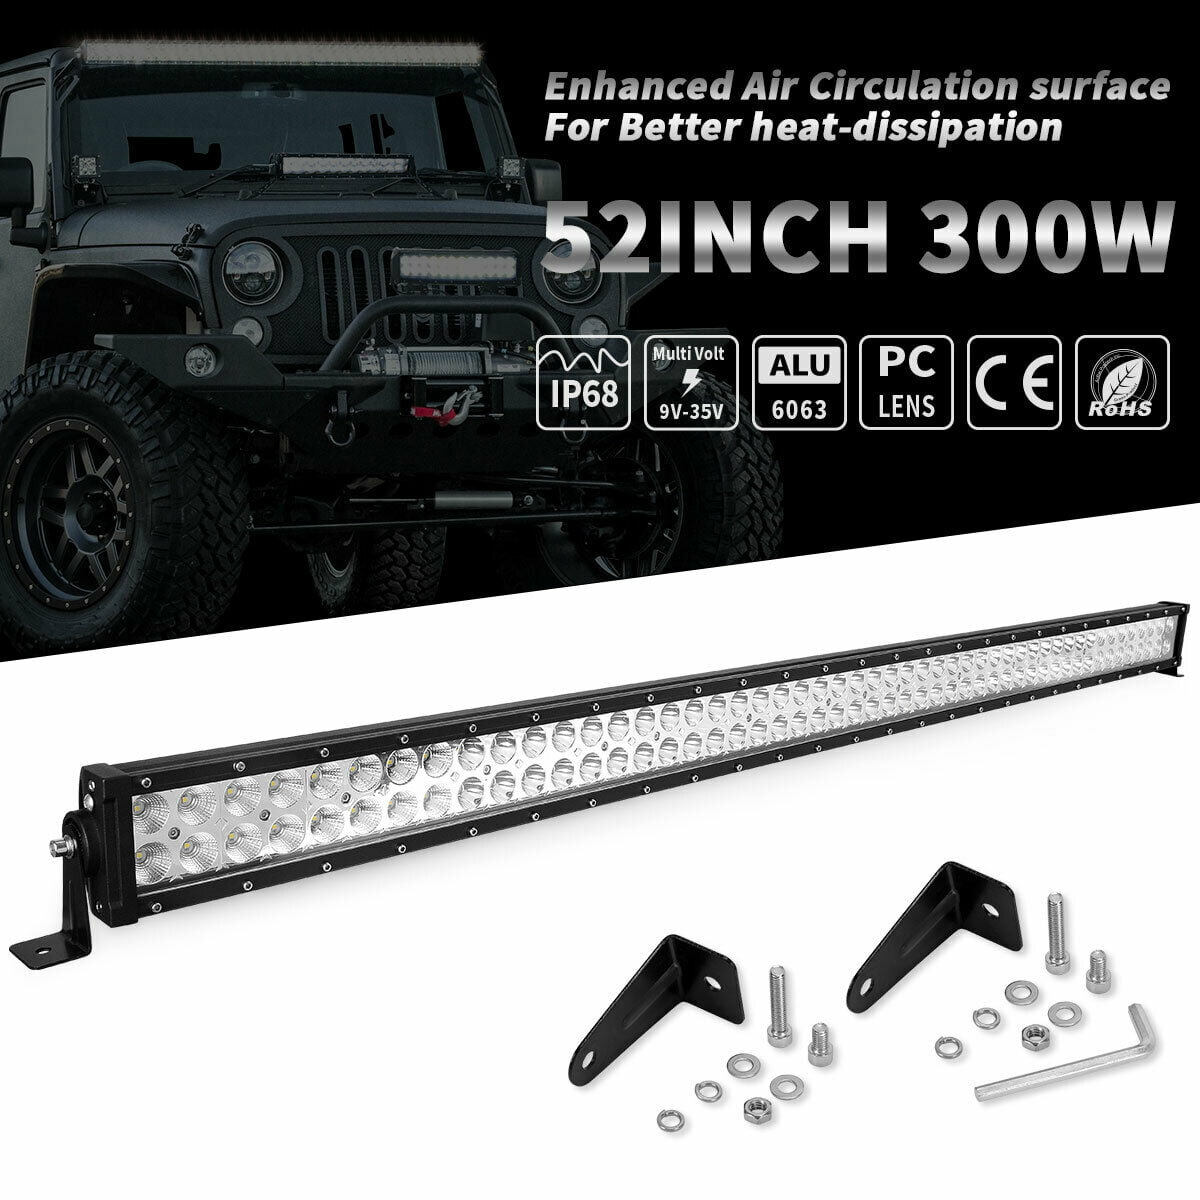 52inch CREE LED Work Light Bar 300W Straight Truck Offroad SUV Boat Driving Jeep 